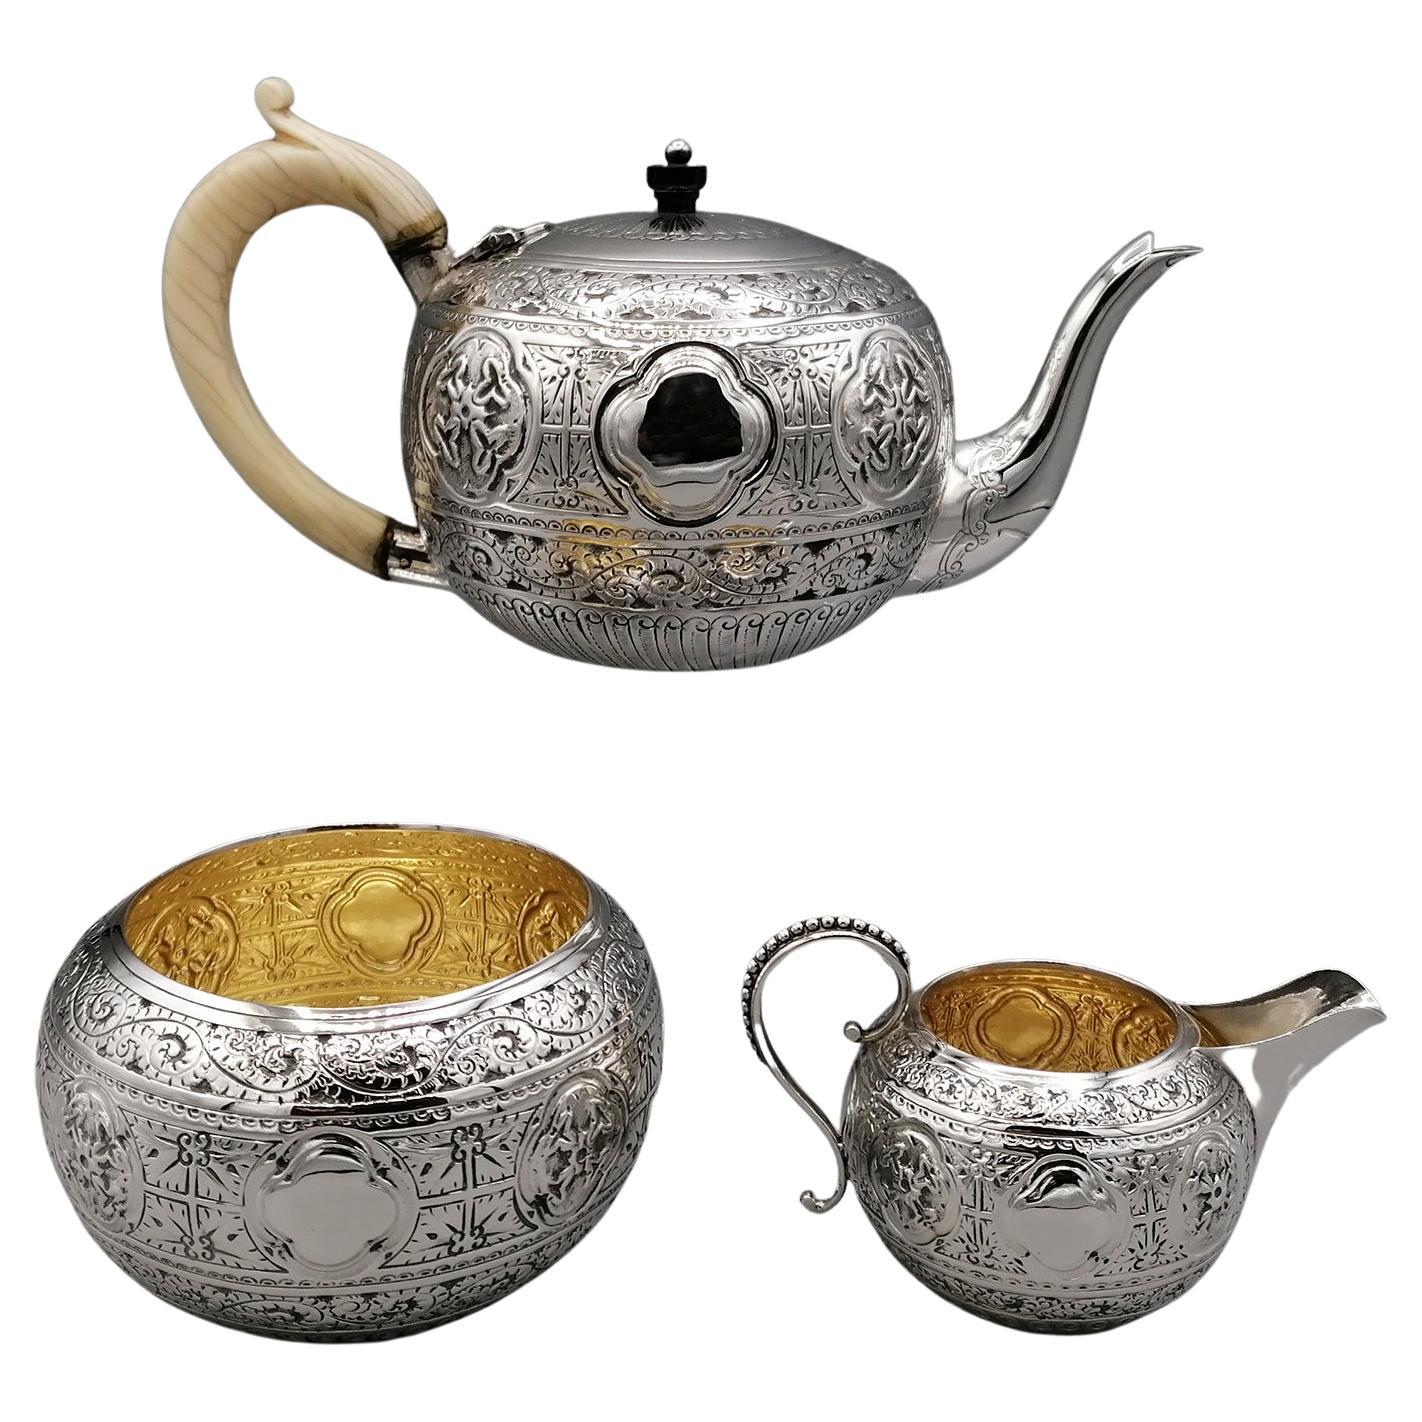 Fine sterling bachelor sterling silver tea set.
Finely chiselled and engraved on the entire outside with scroll and torchon motifs. 
The inside of the milk jug and sugar bowl is finished with a satin gold finish.
The teapot has an ivory